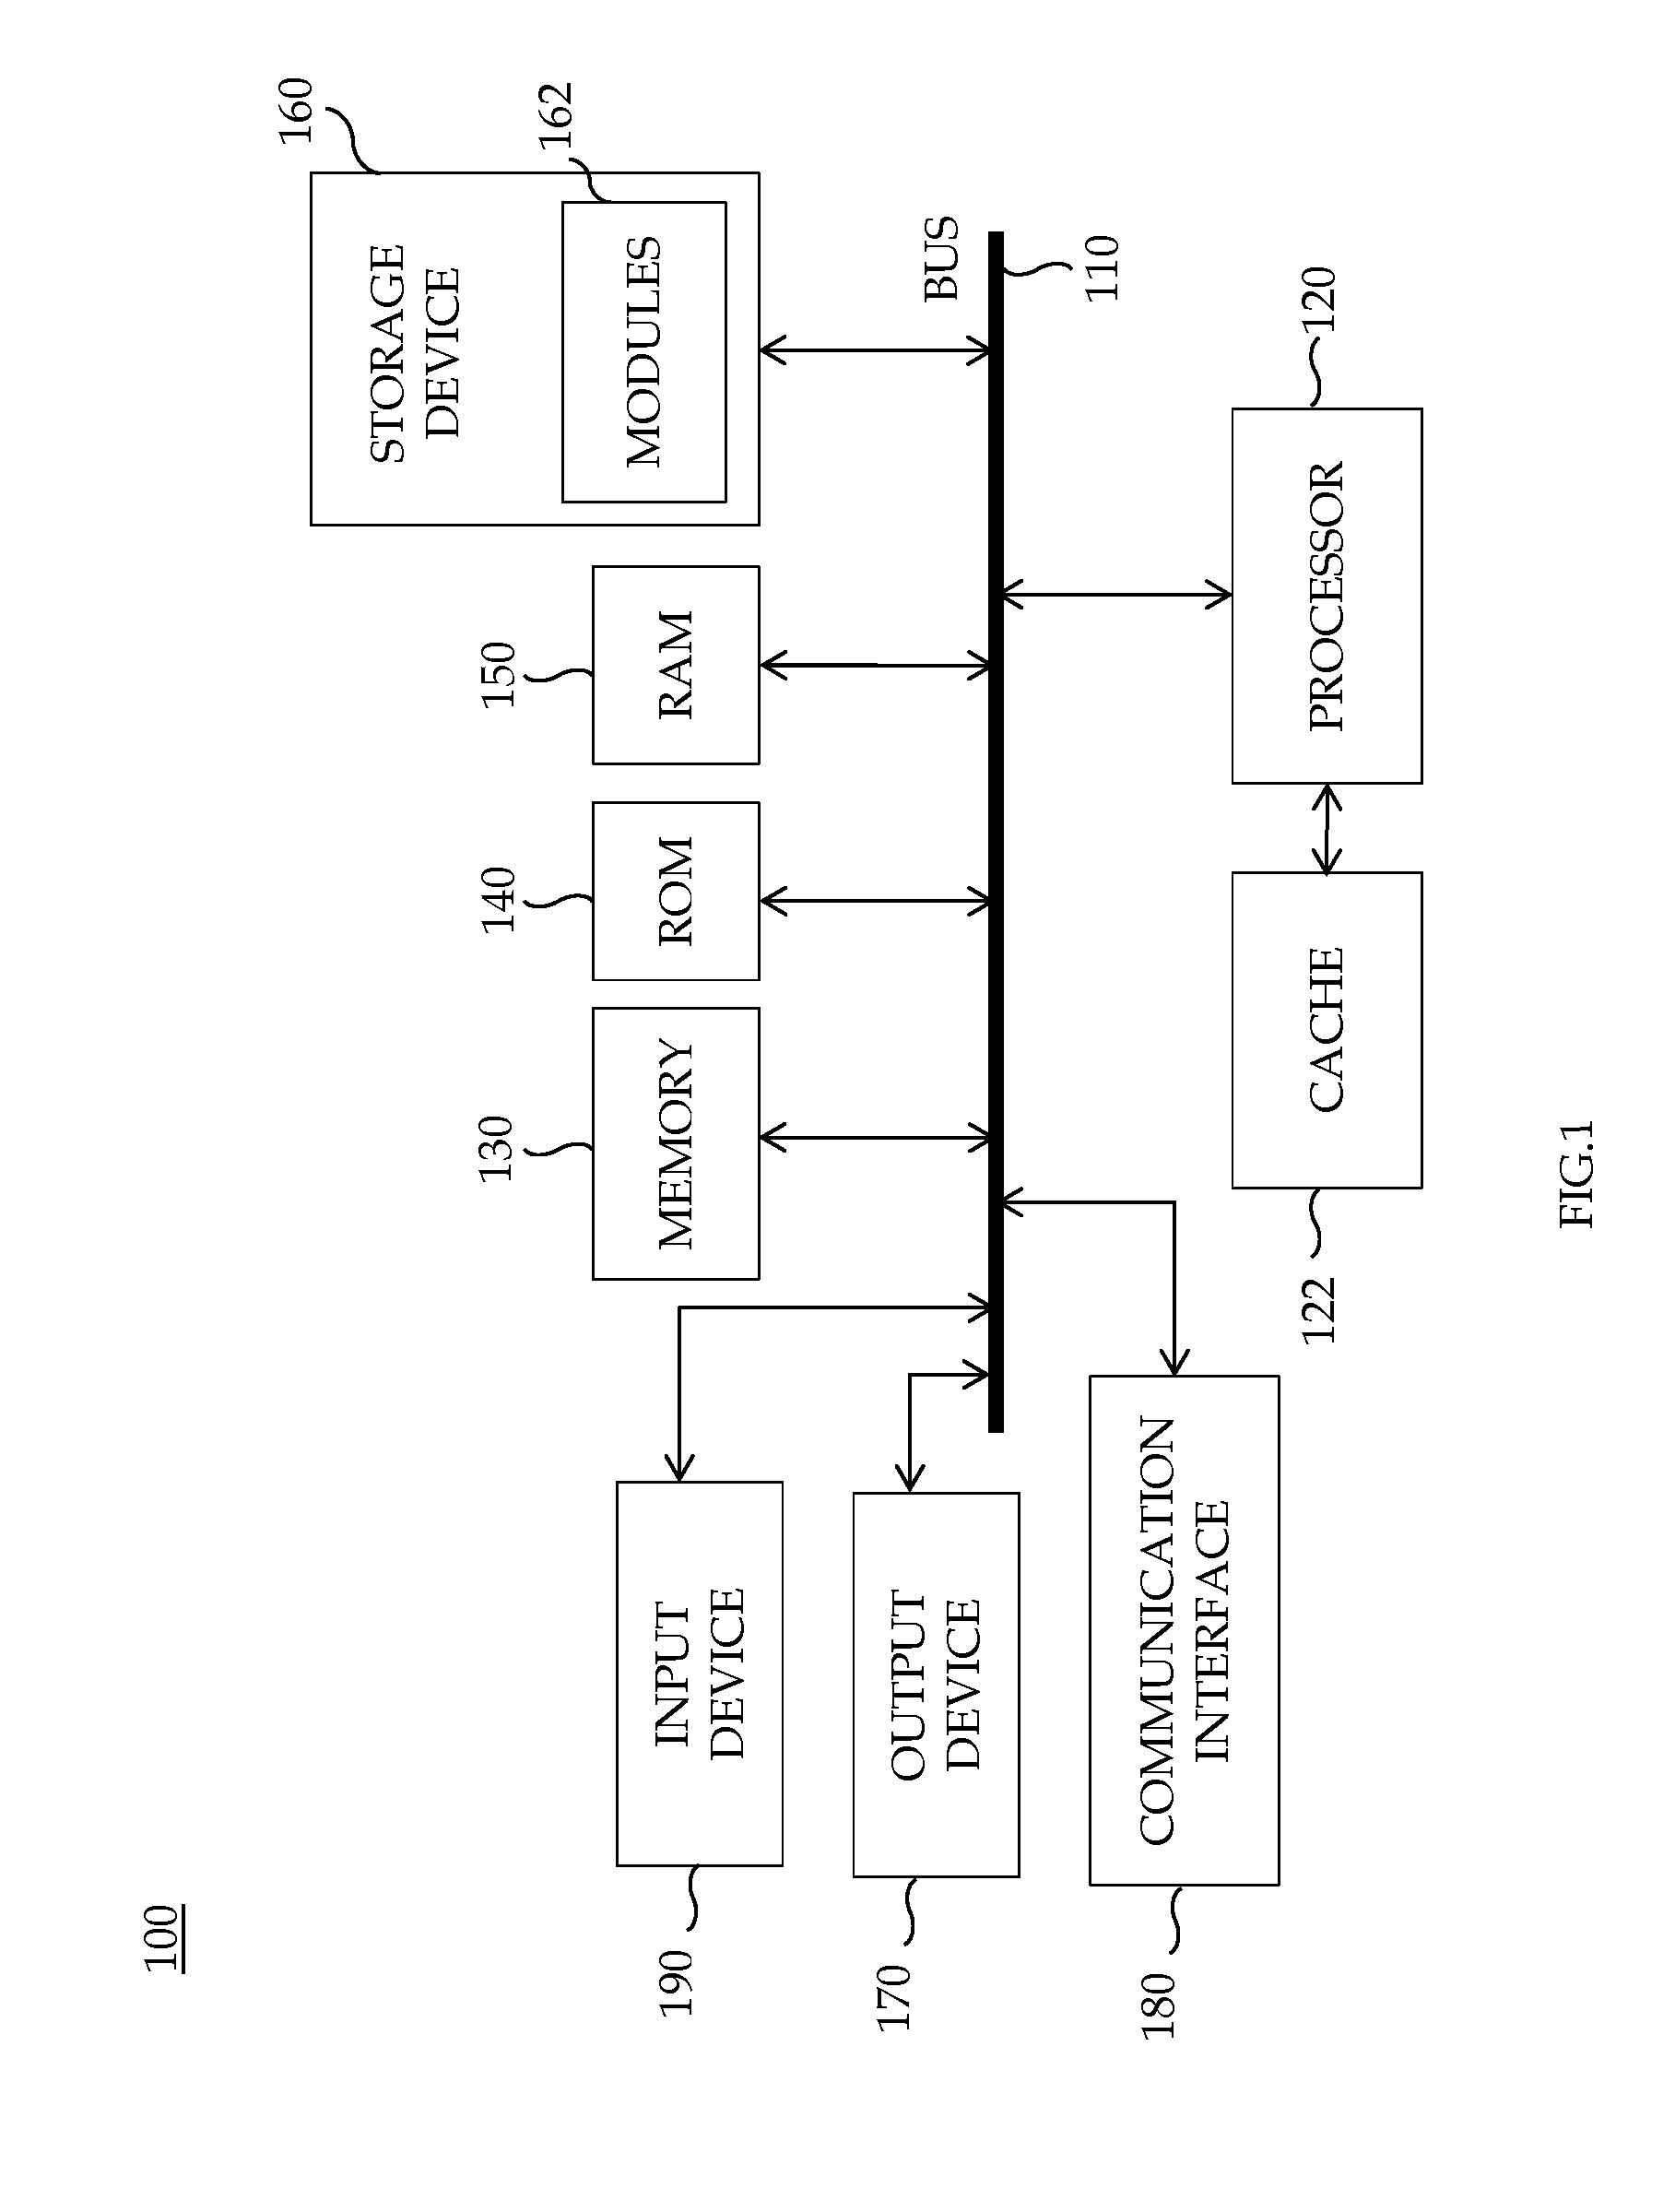 System and method for selecting agent in a contact center for improved call routing